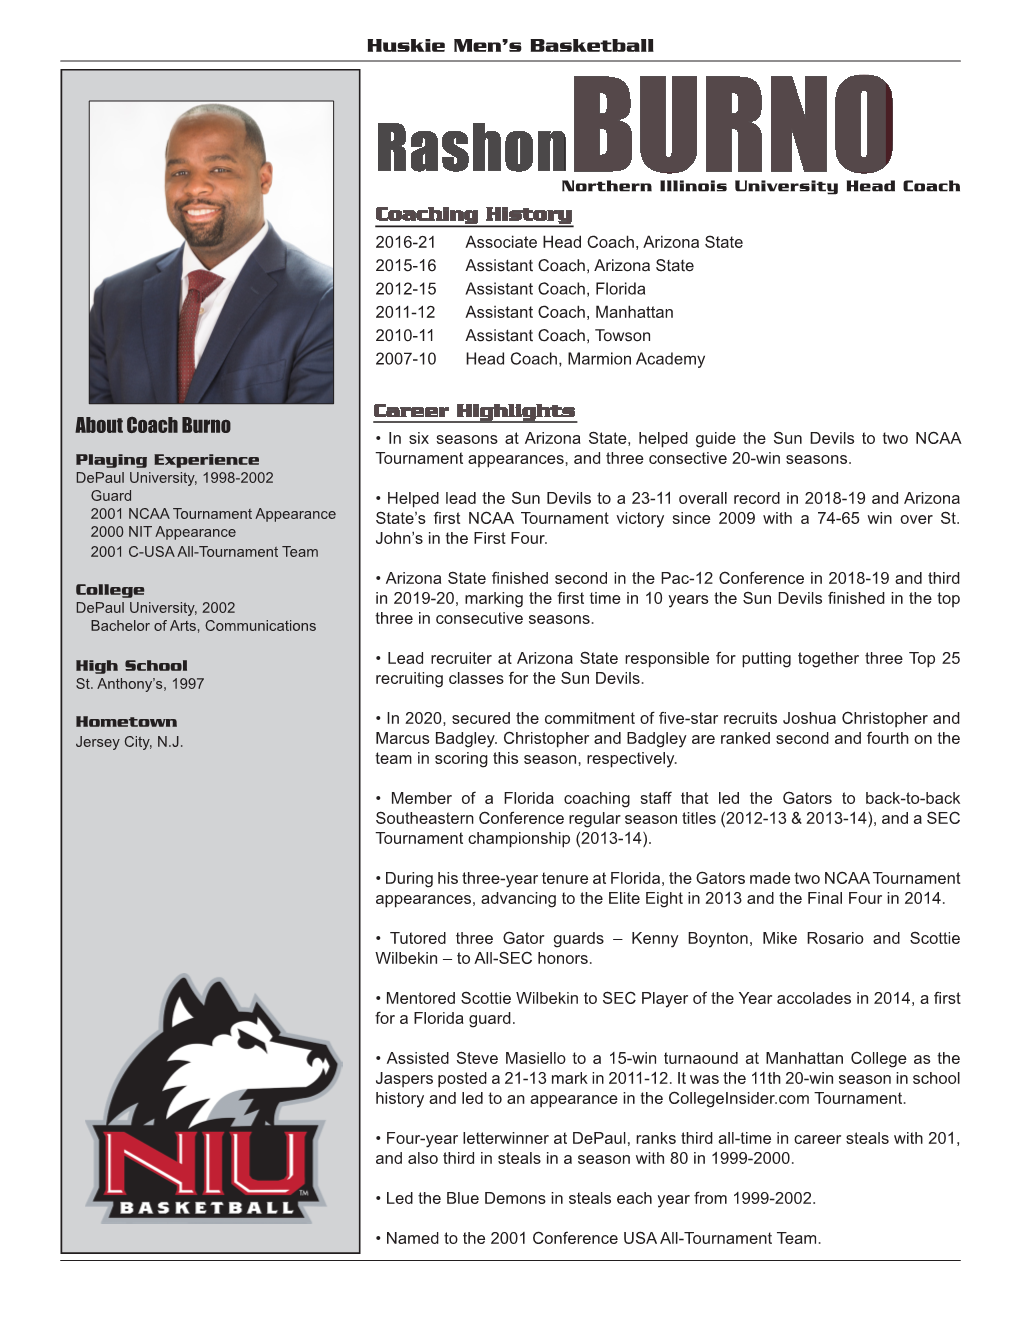 Huskie Men's Basketball About Coach Burno Coaching History Career